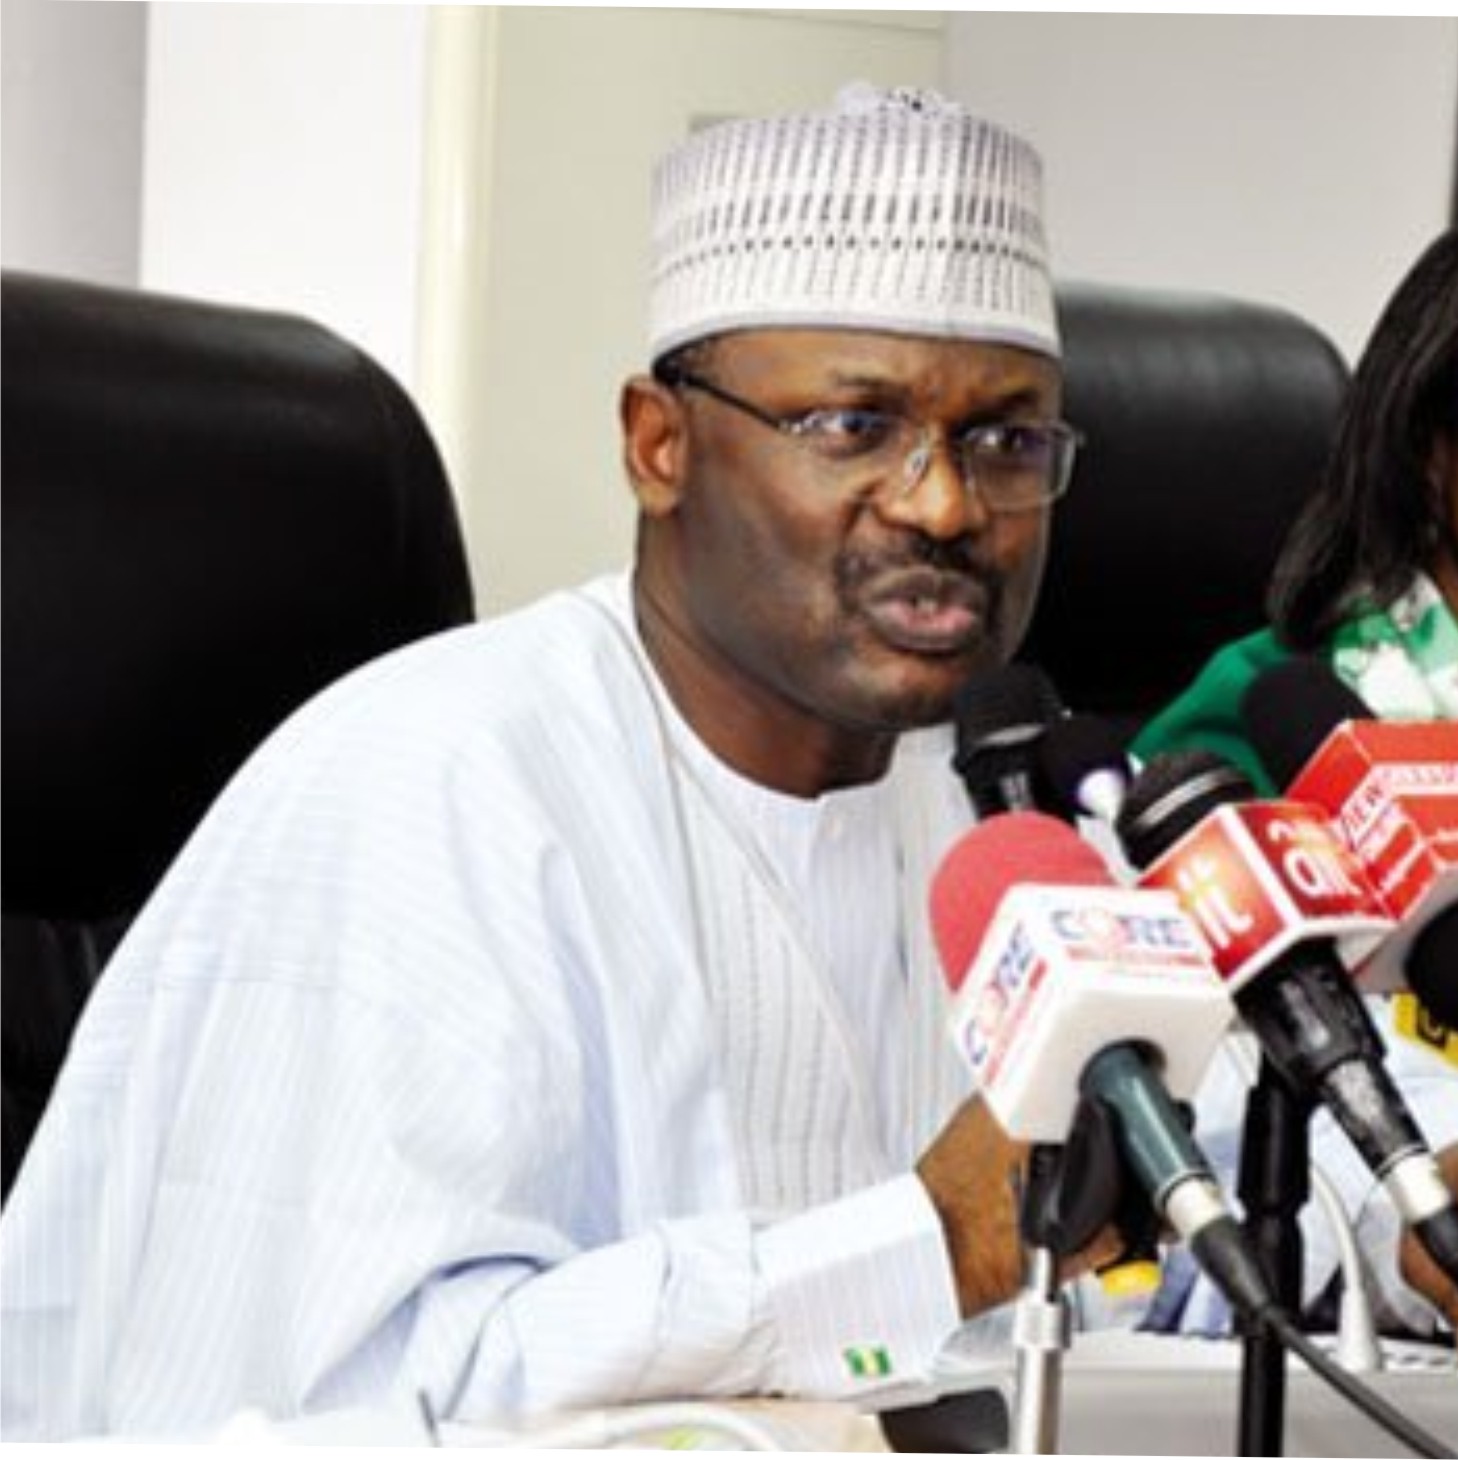 Ondo Election: We Can’t Rest On Our Oars, INEC Chairman Tells Staff